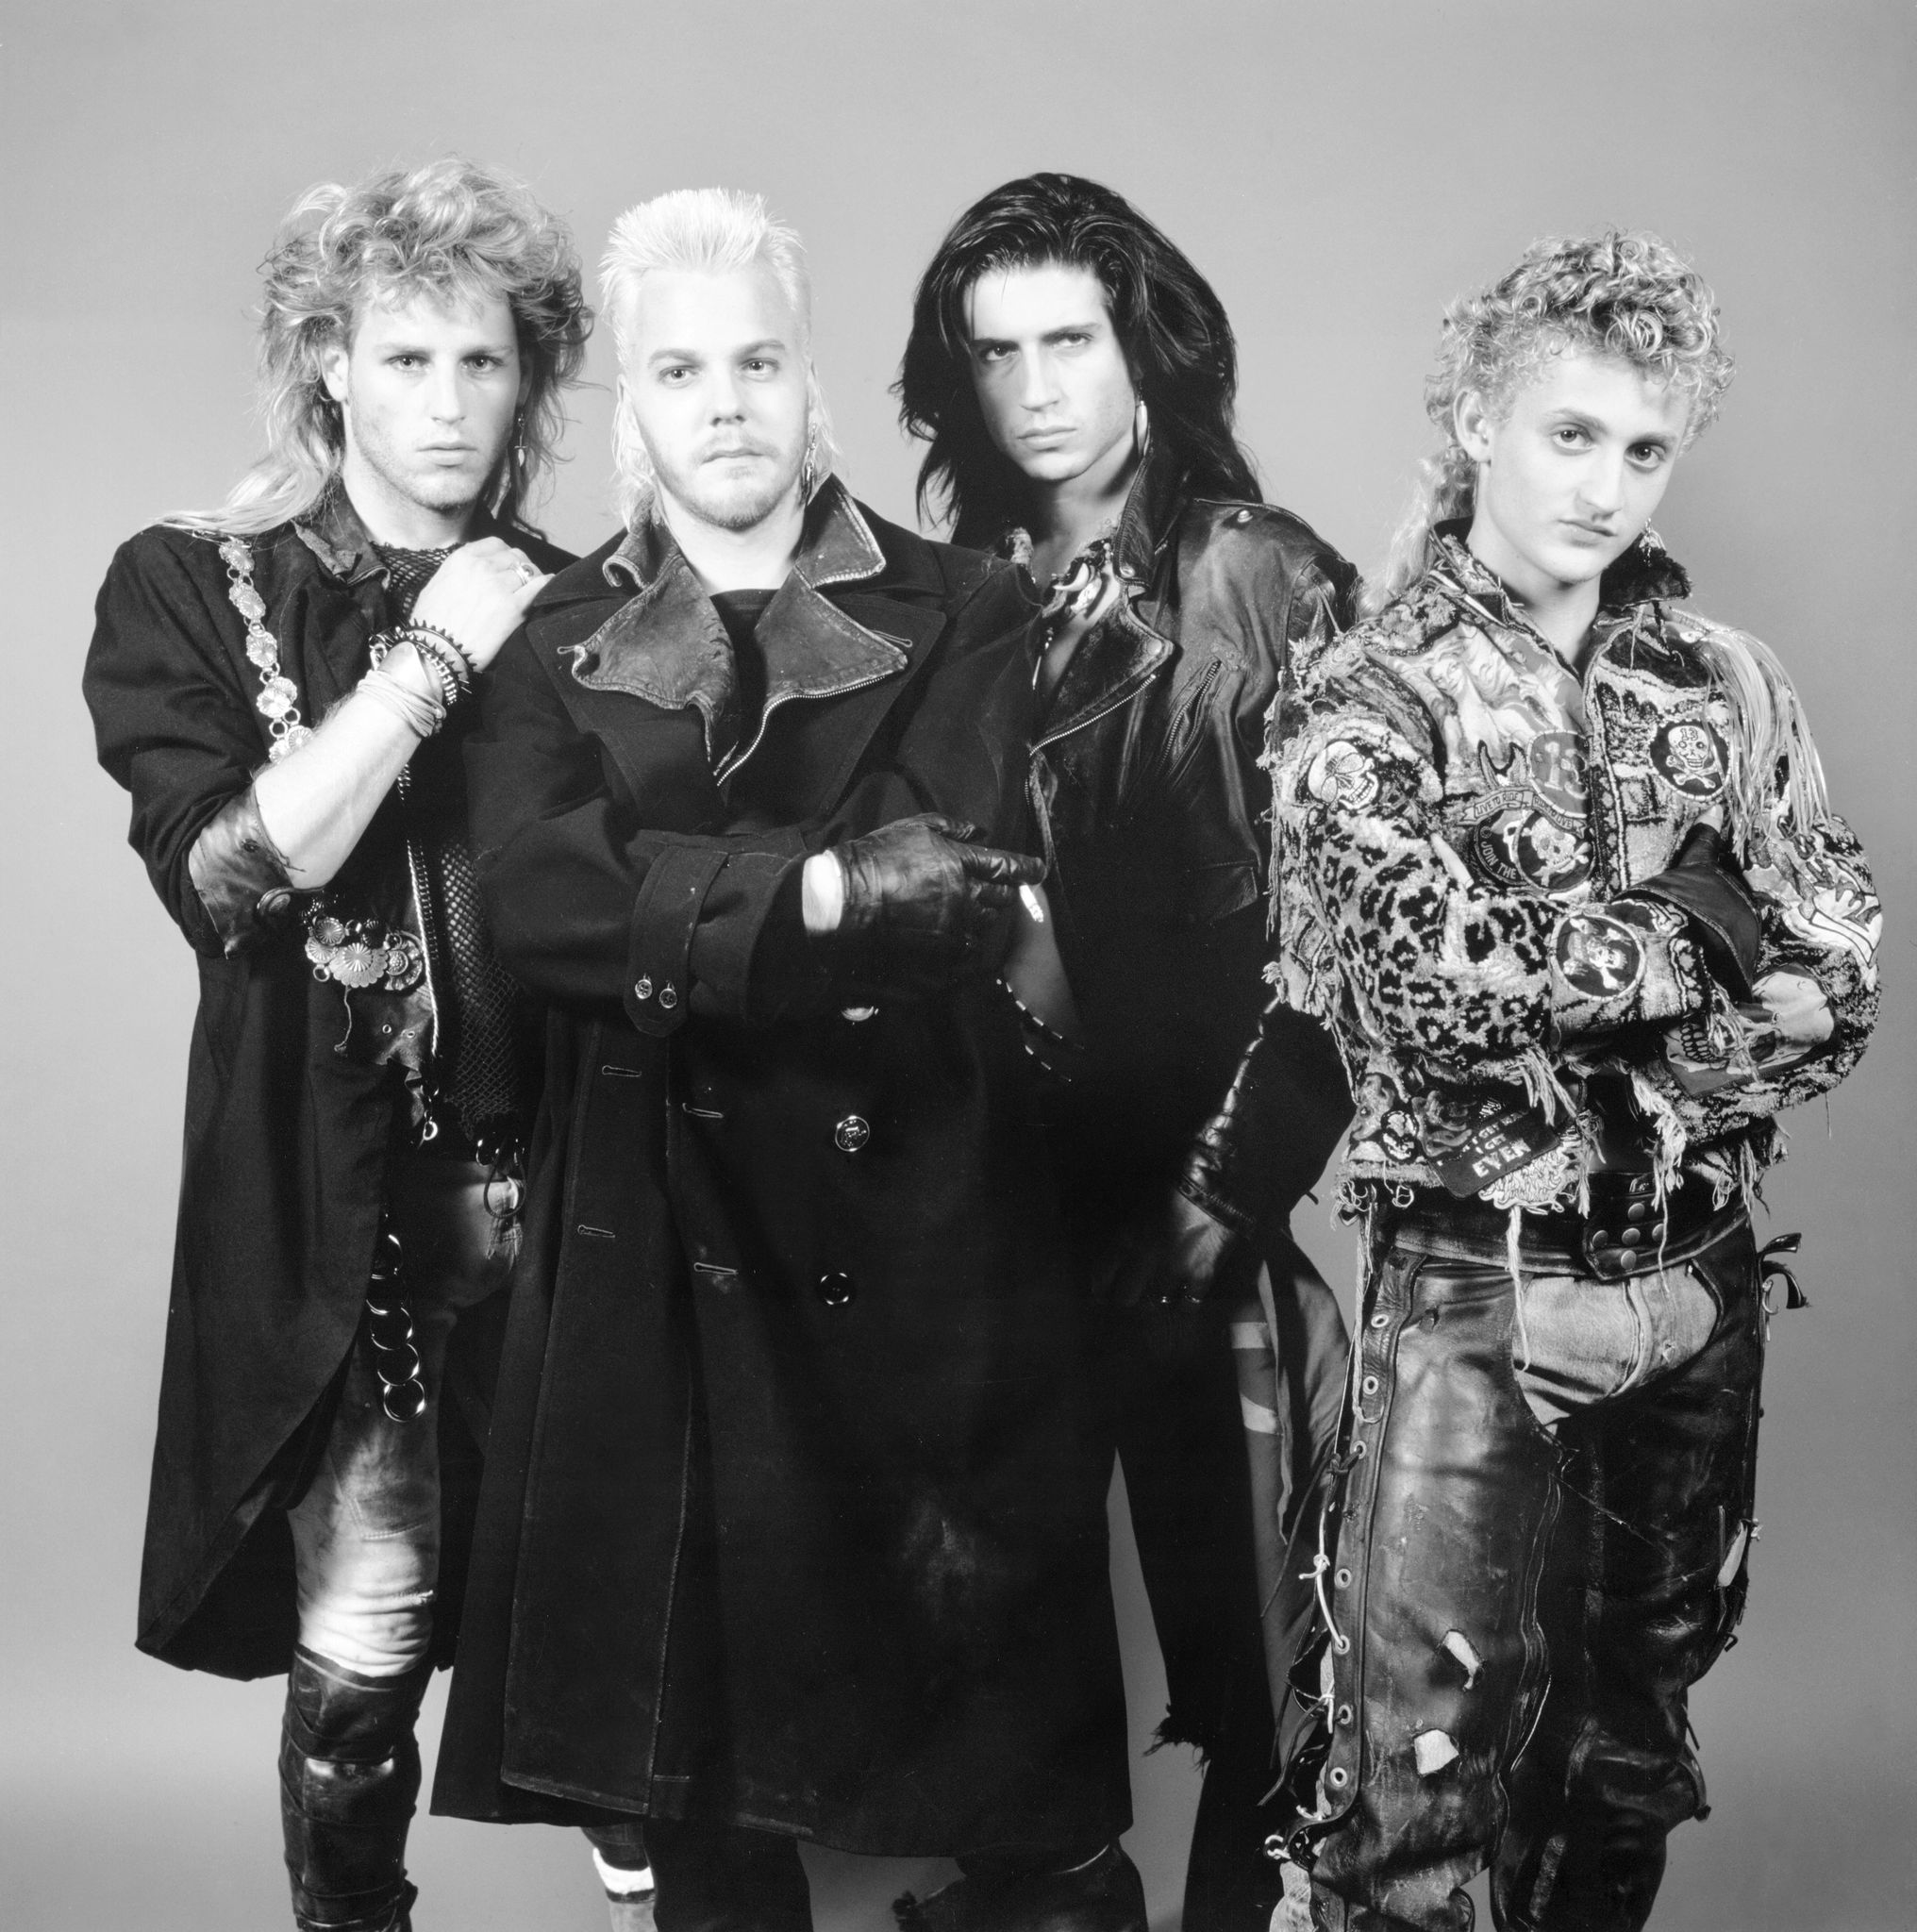 Kiefer Sutherland, Brooke McCarter, Alex Winter and Billy Wirth in The Lost Boys (1987)